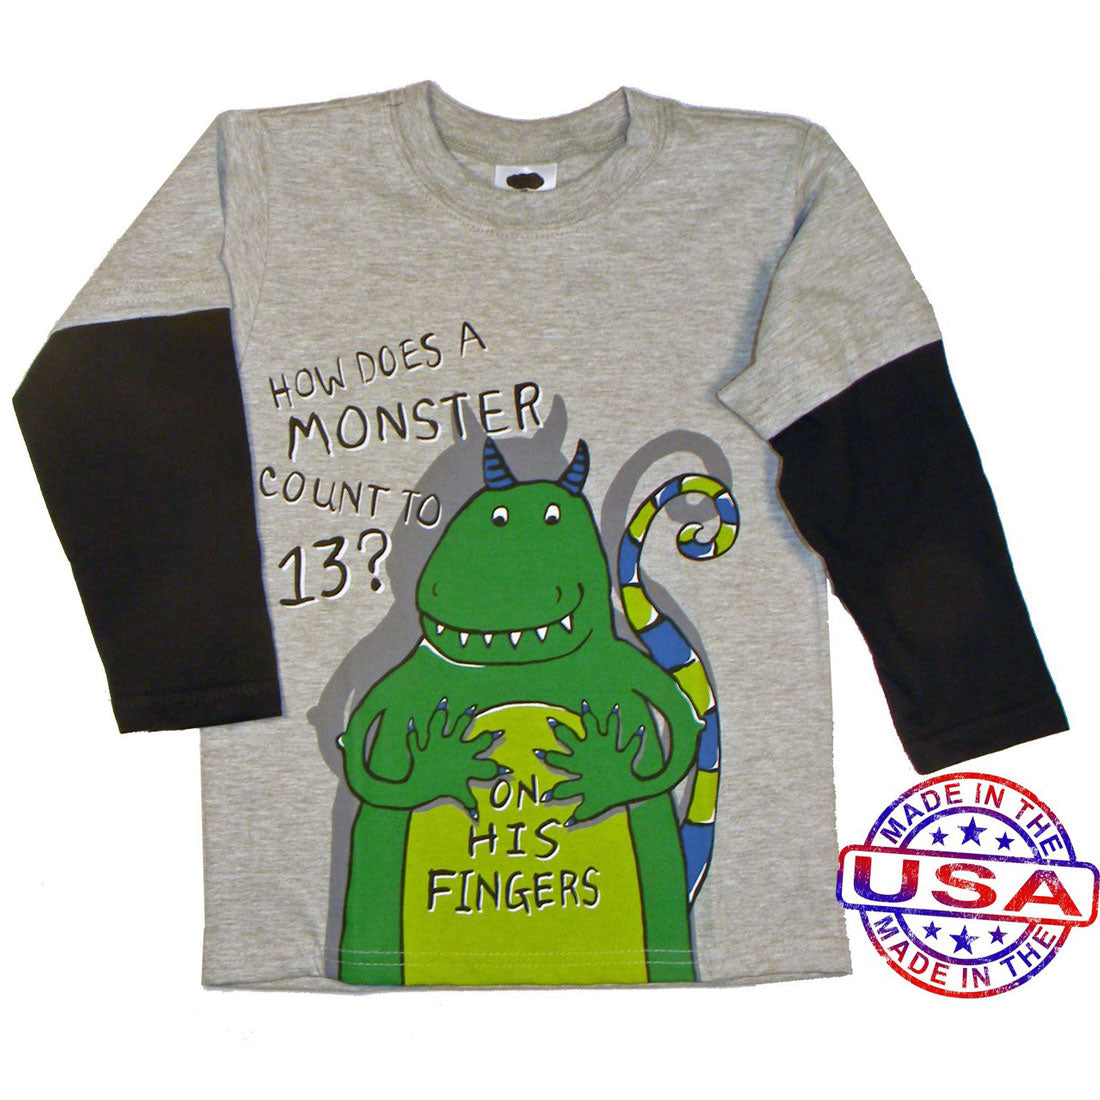 Boys' Counting Monster Two in One Shirt by Mulberribush